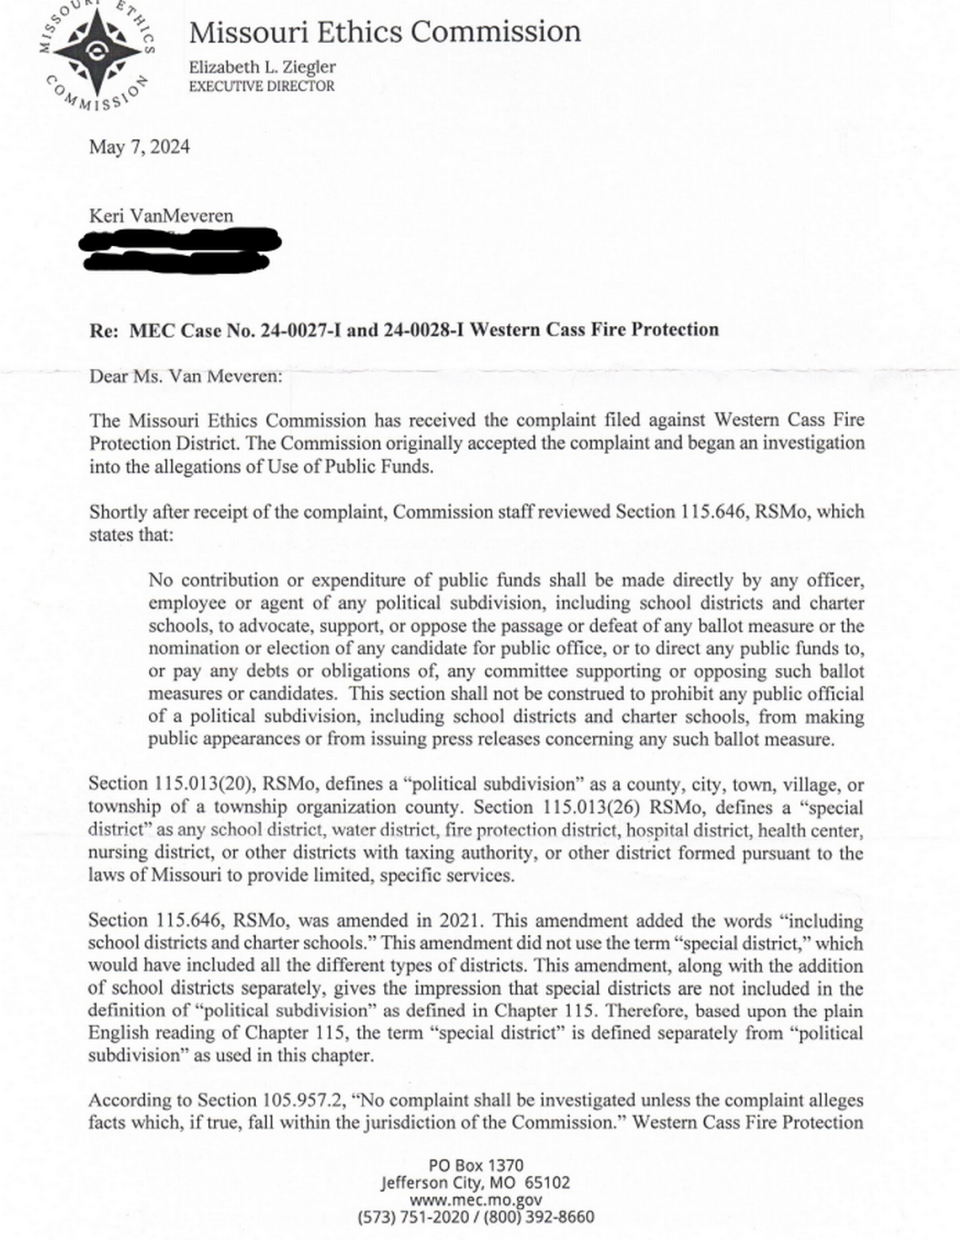 Page one of a letter from Missouri Ethics Commission director Elizabeth Ziegler.